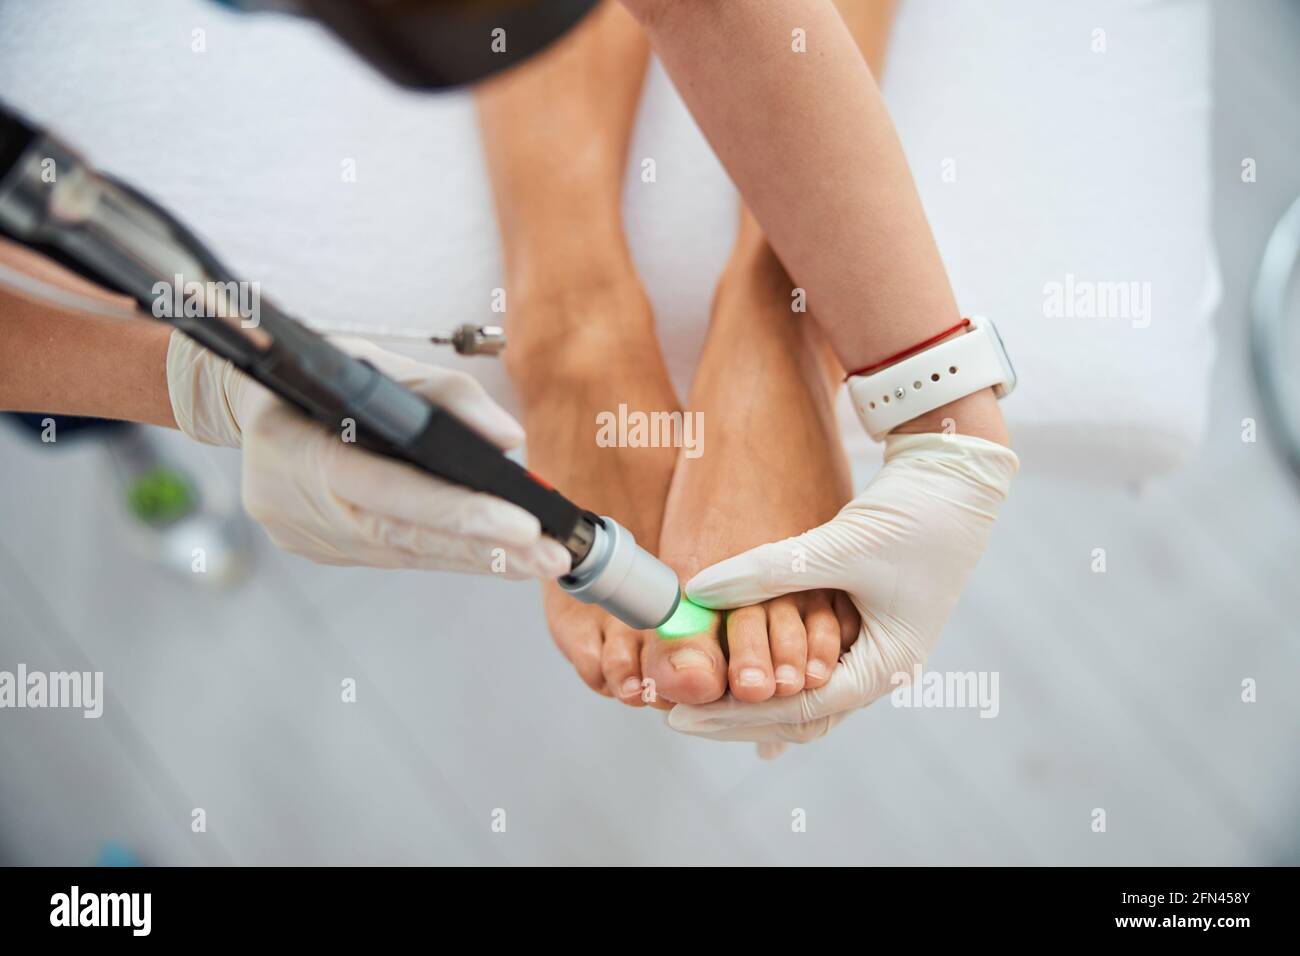 Patient undergoing a hair removal procedure on her toe Stock Photo